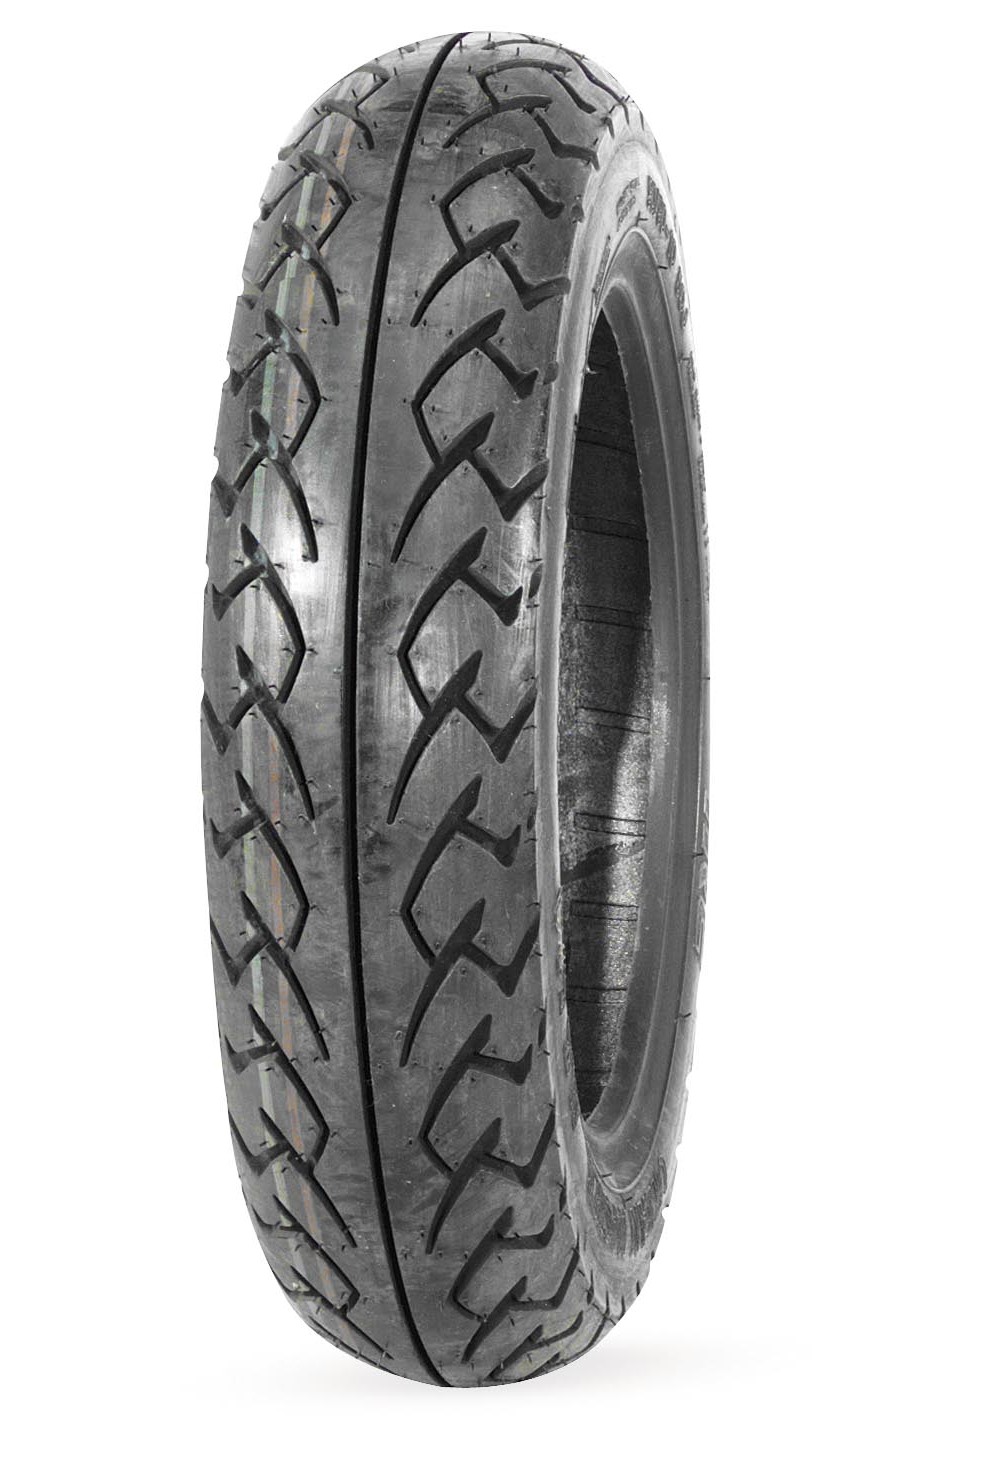 IRC 321918 MB-520 Scooter Front/Rear Tire - 3.50-10 - Walmart.com